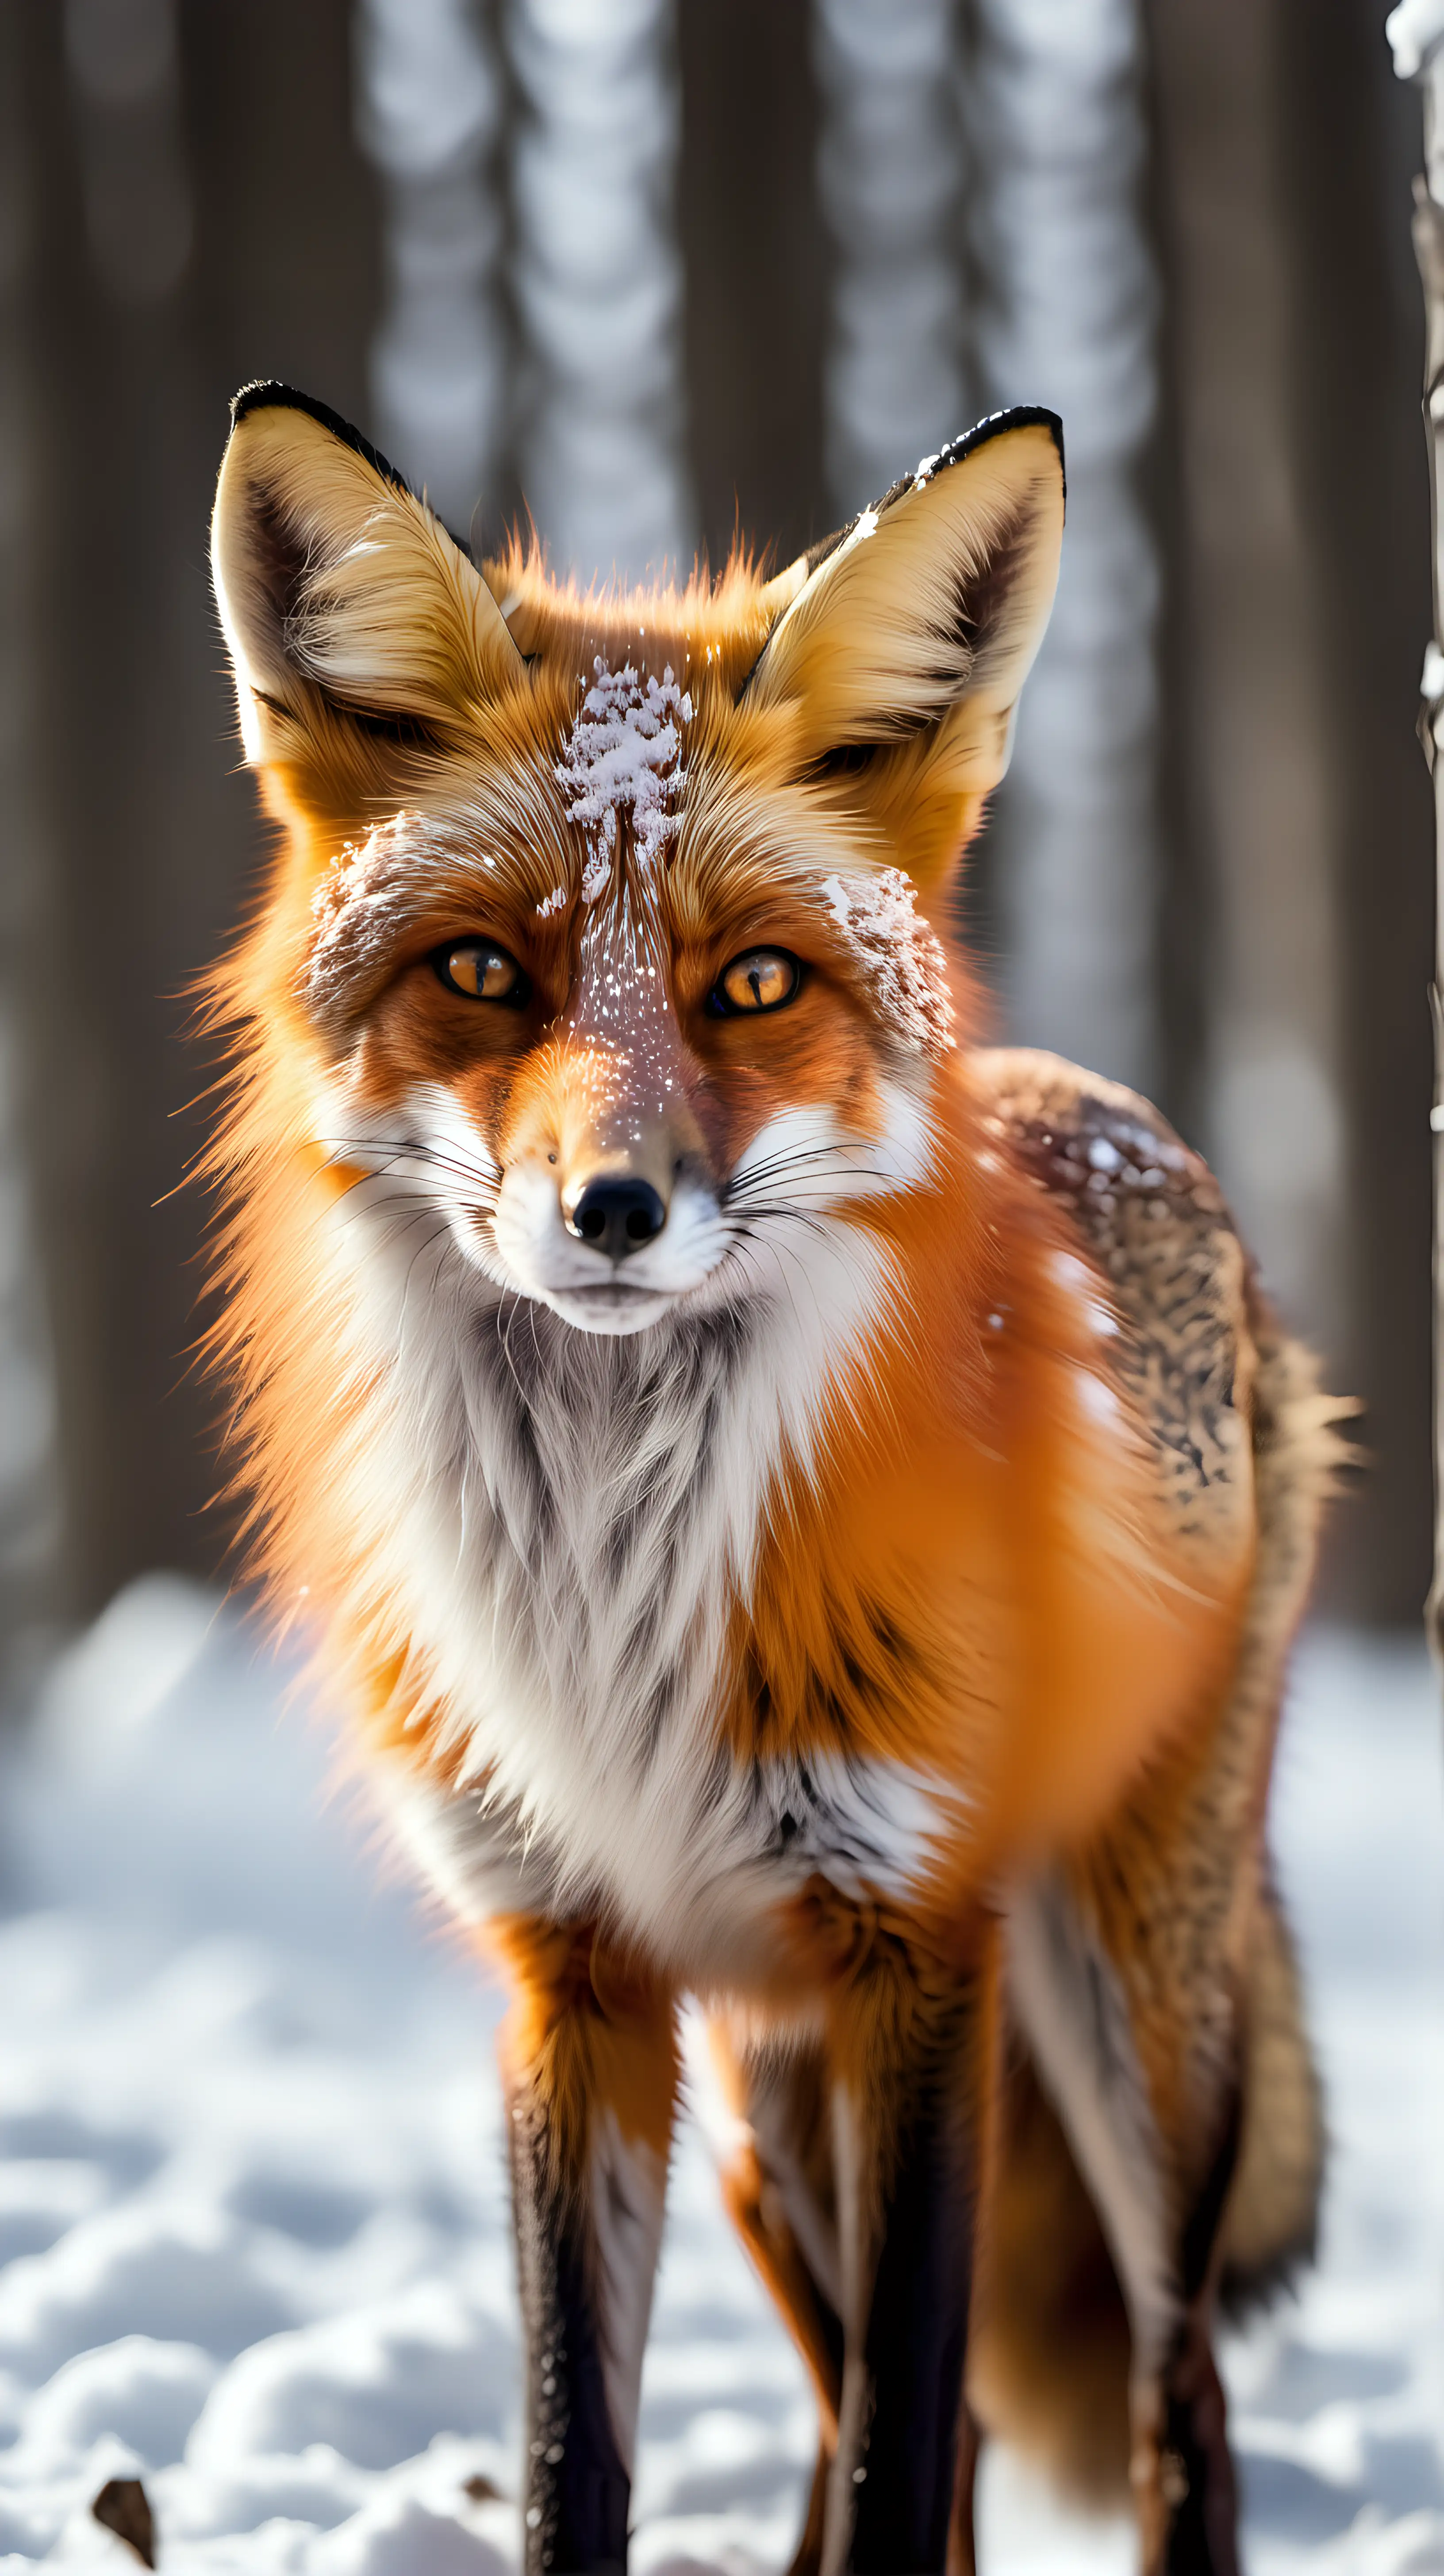 portrait of a fox, background snow forest
